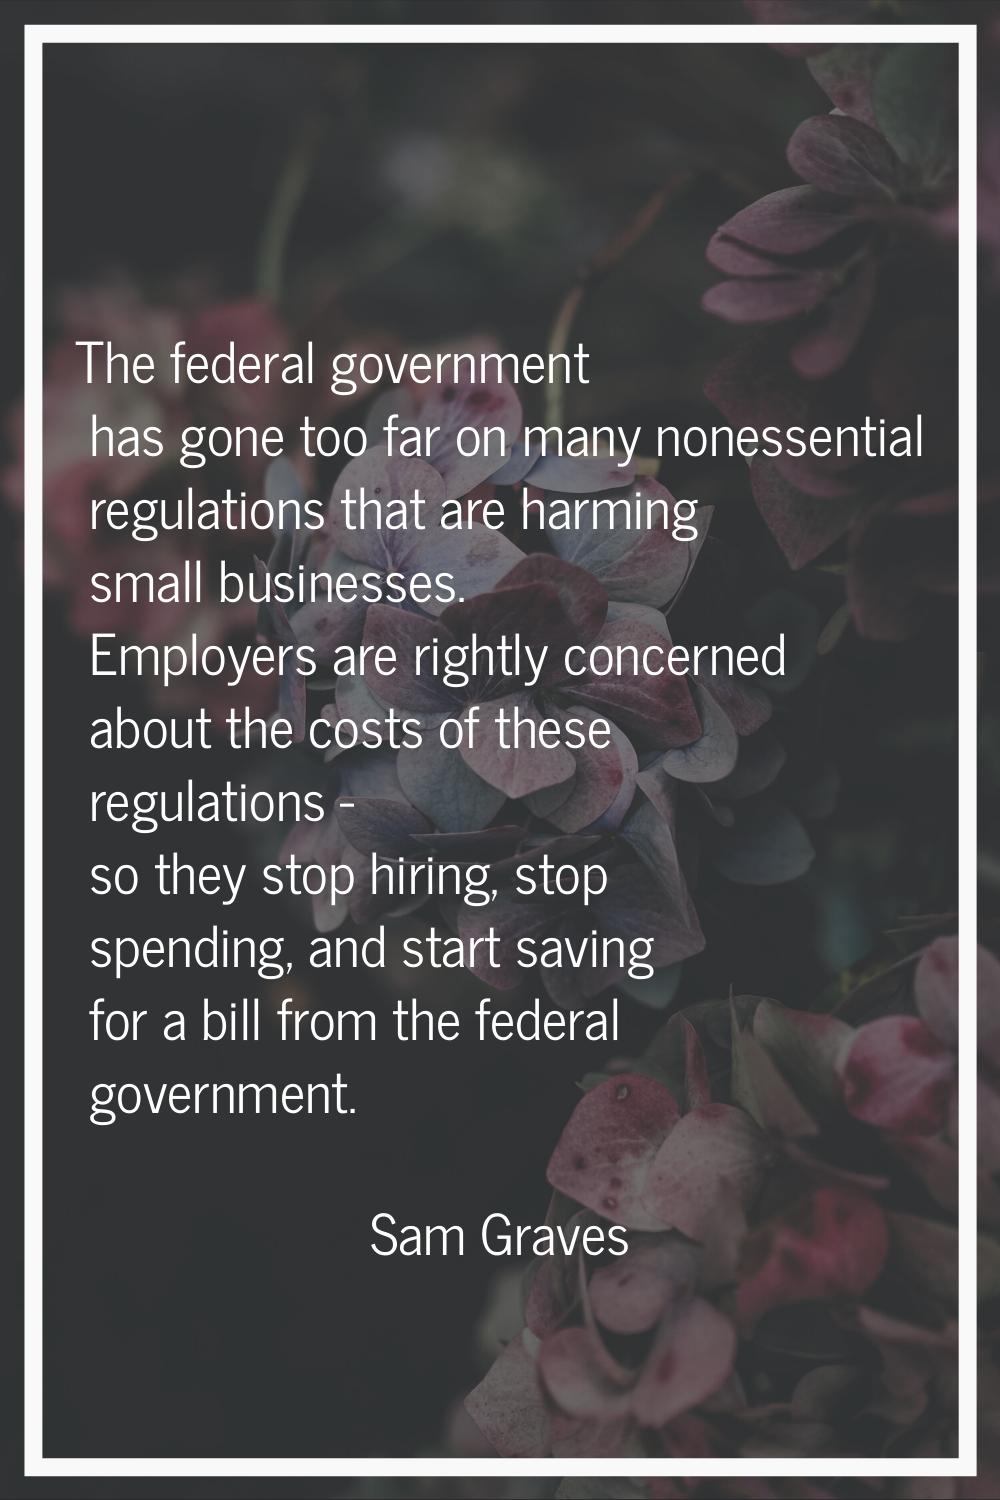 The federal government has gone too far on many nonessential regulations that are harming small bus